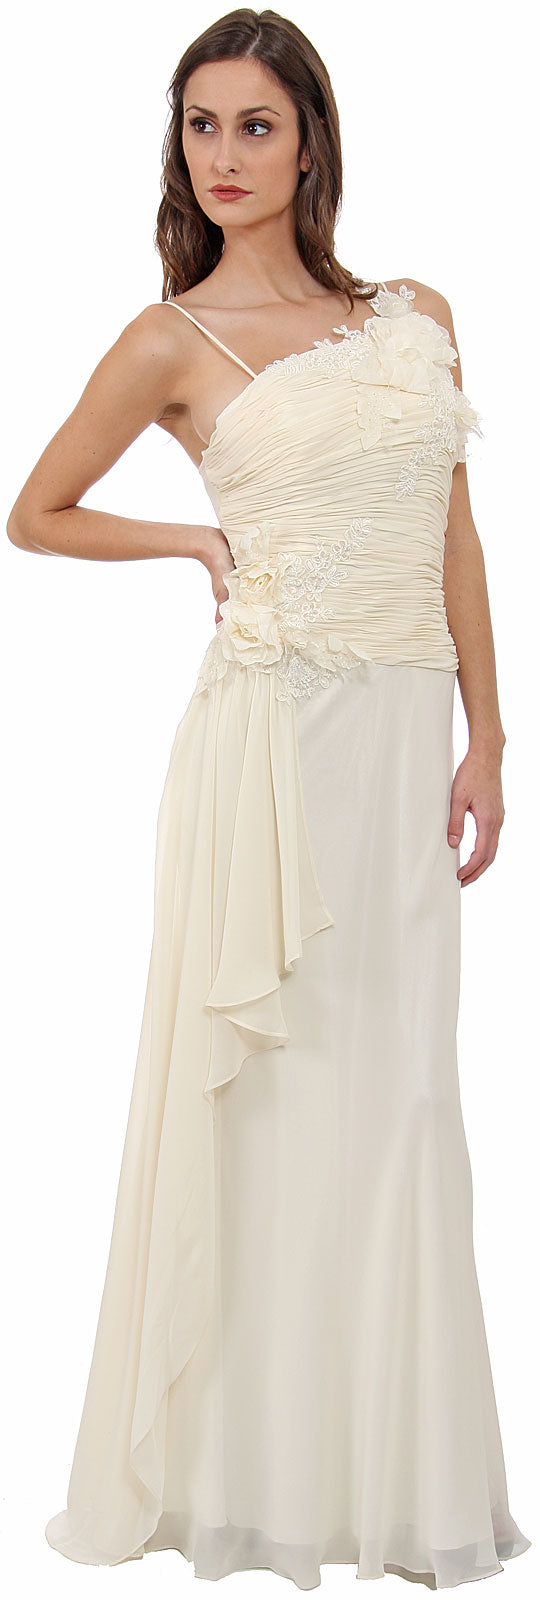 Image of Asymmetric Top Floral And Sheered Formal  dress in Ivory